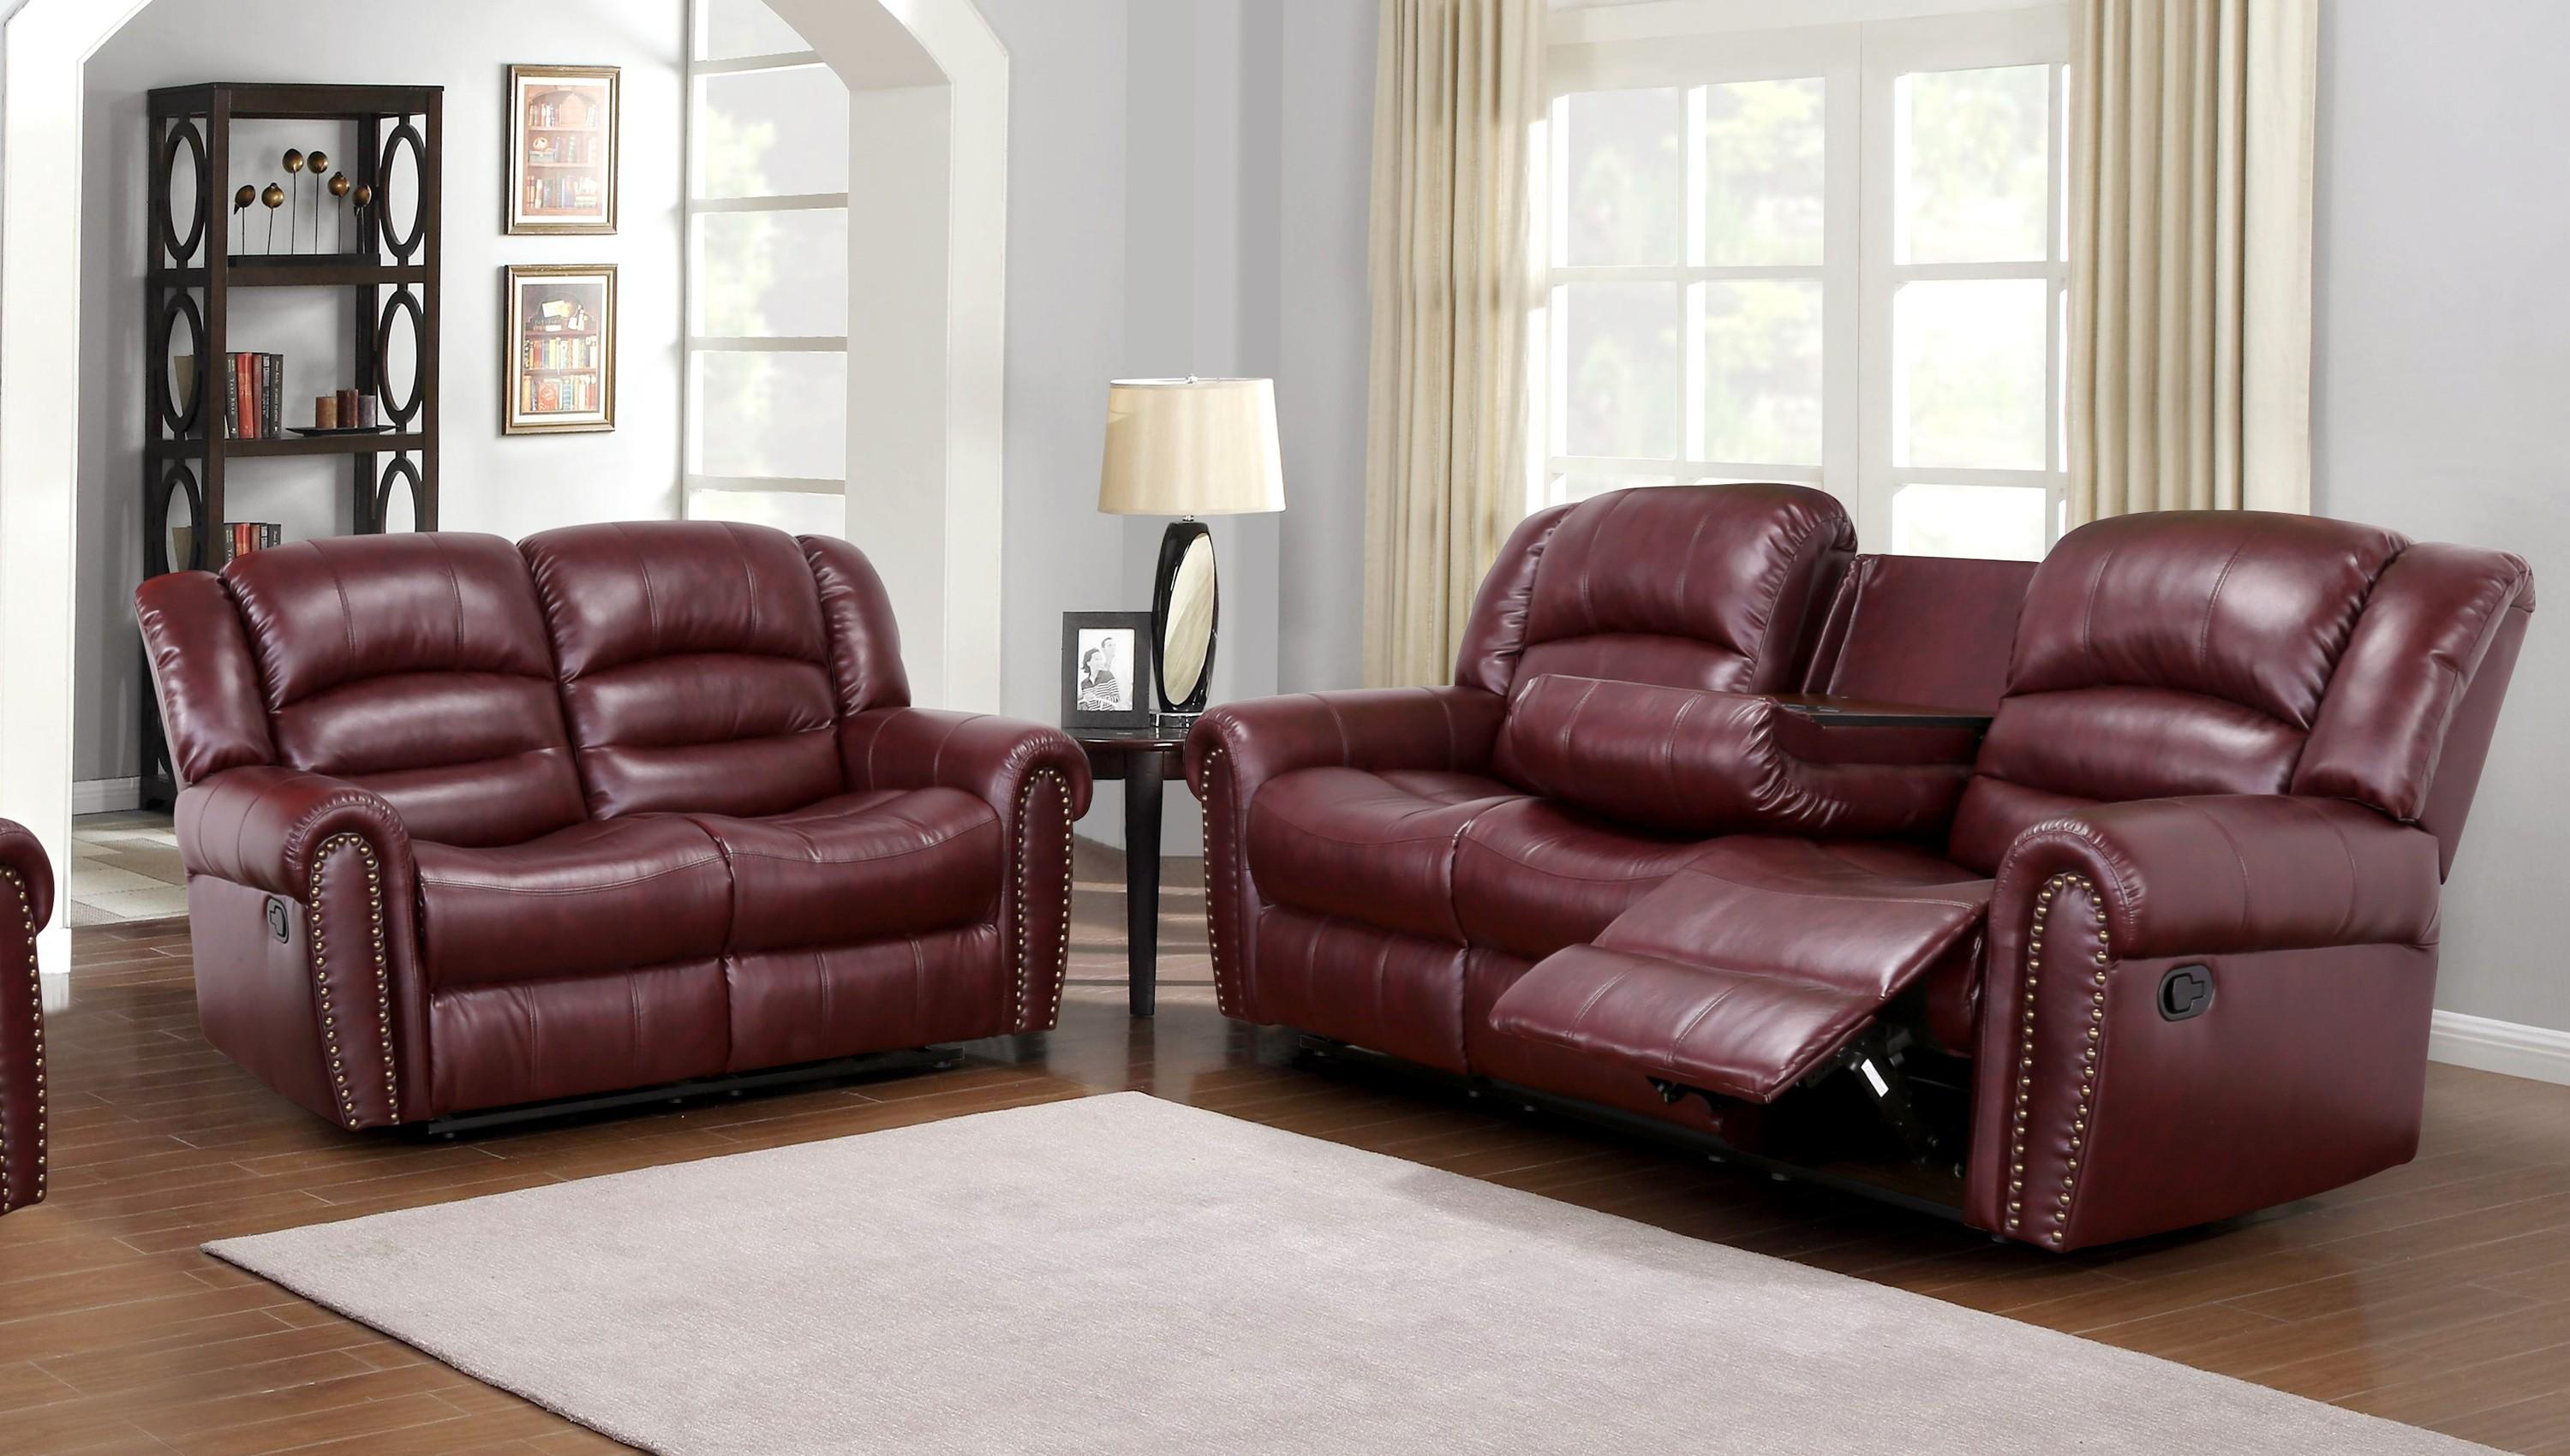 

    
Meridian 686 Chelsea Living Room Set 2pcs in Burgundy Contemporary Style
